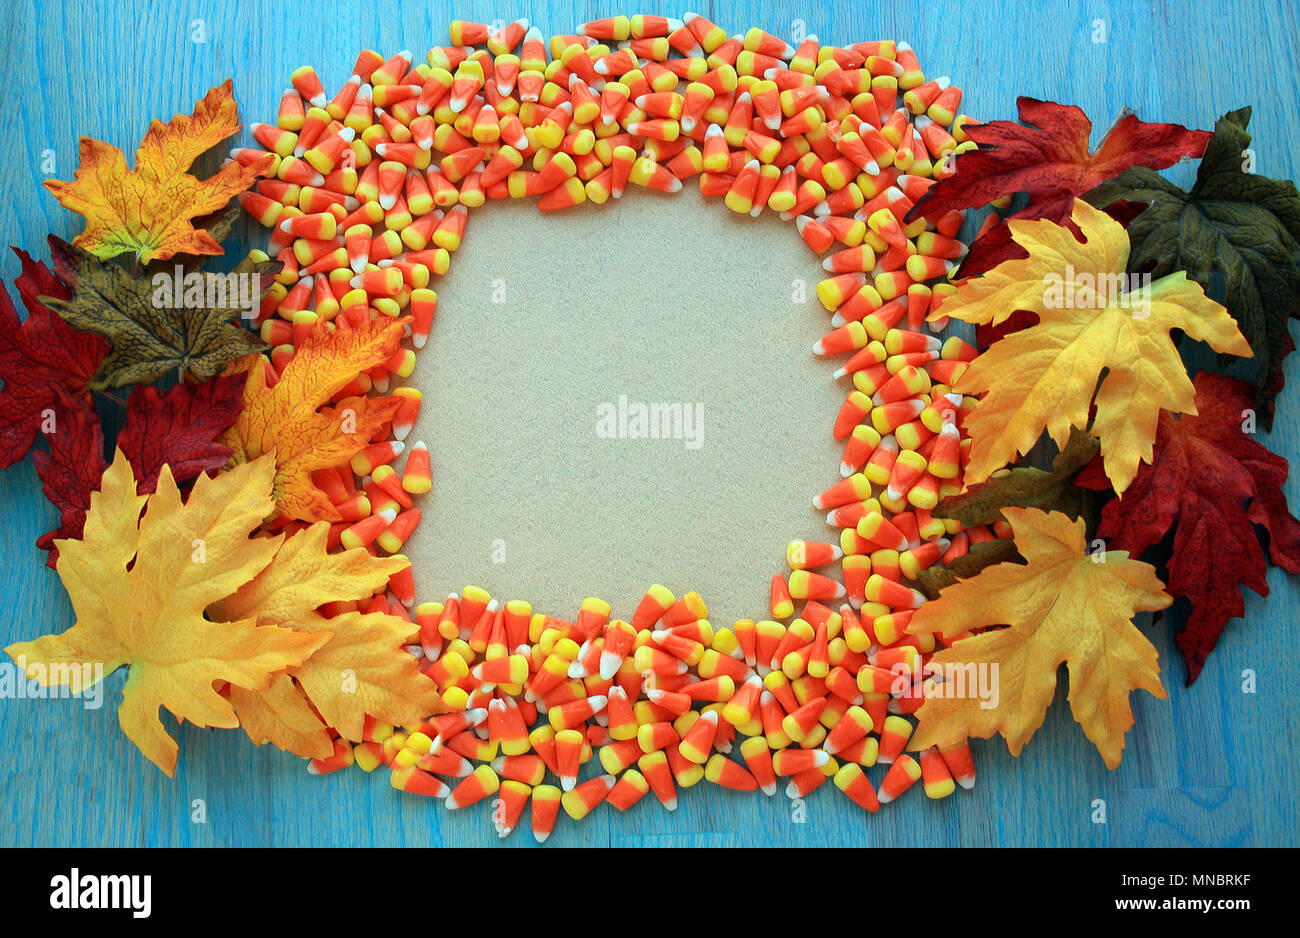 Frame of candy corns with fall leaves. Surrounding the edges of the frame is a green rustic wooden background.  Fall concept sale sign/ party invites. Stock Photo